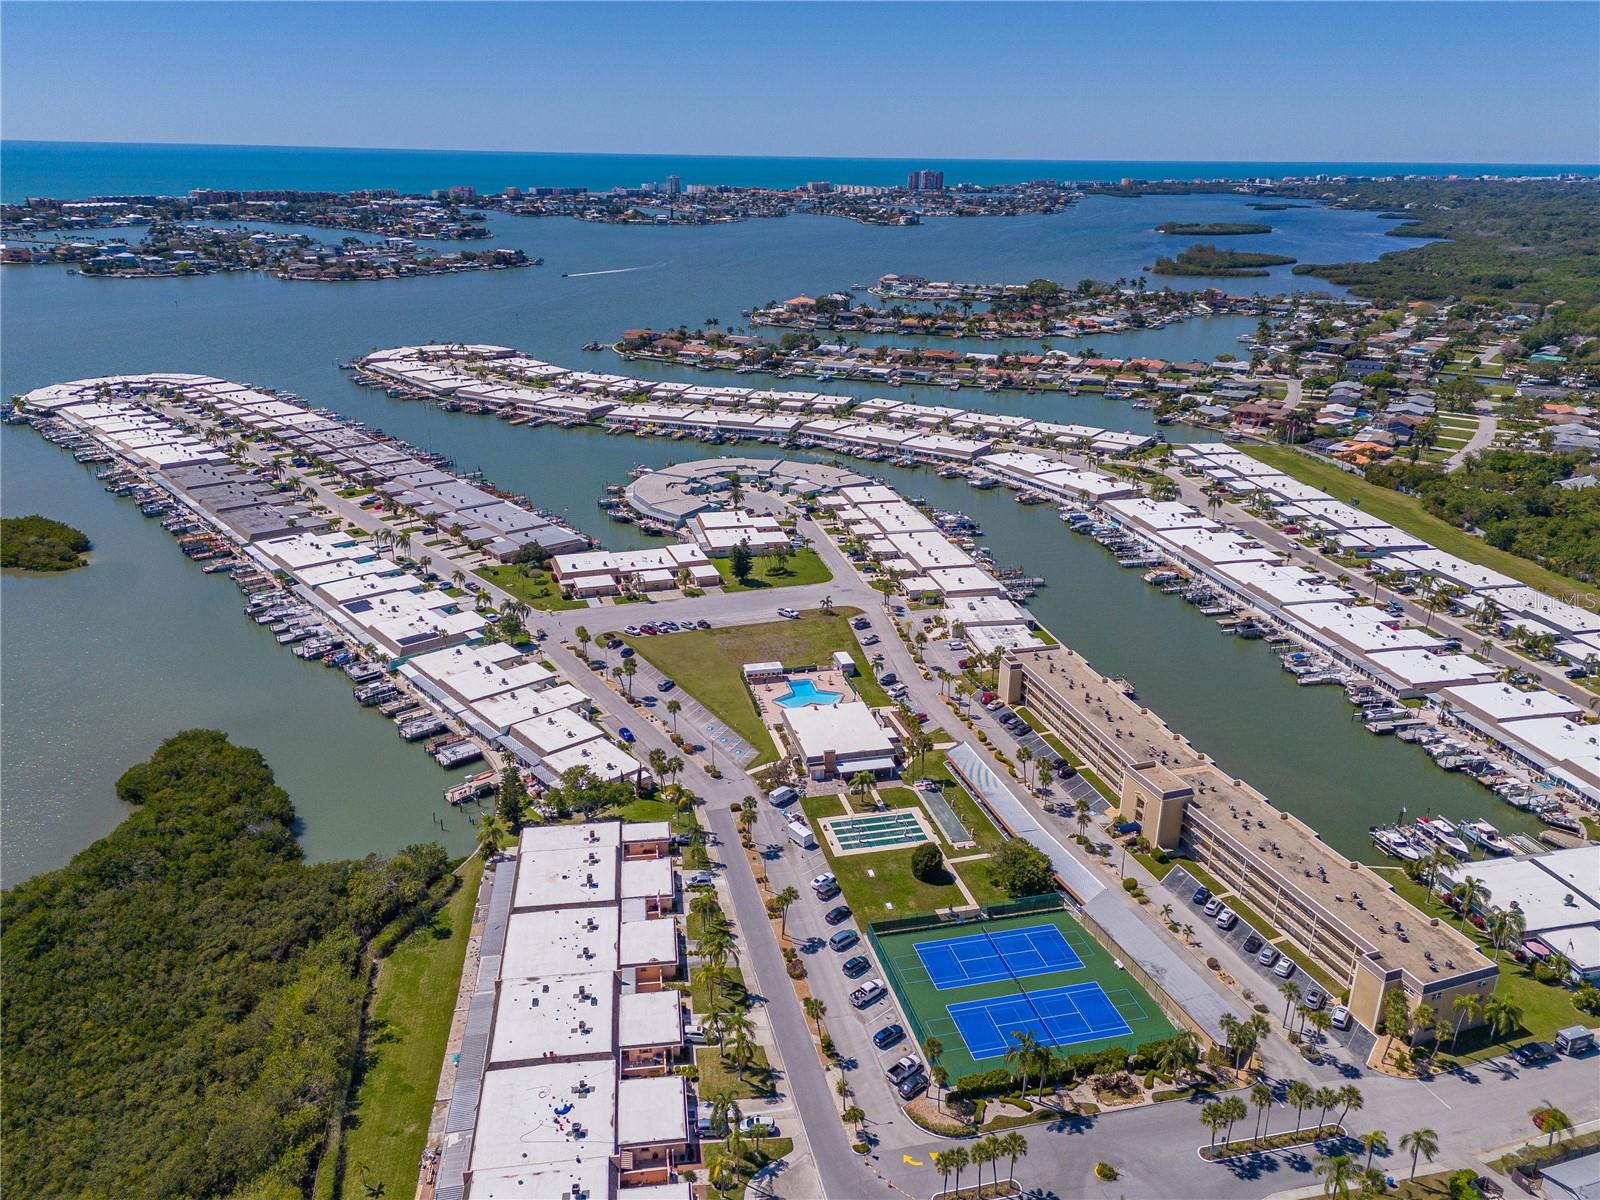 Aerial view of the community and the Intracoastal Waterway